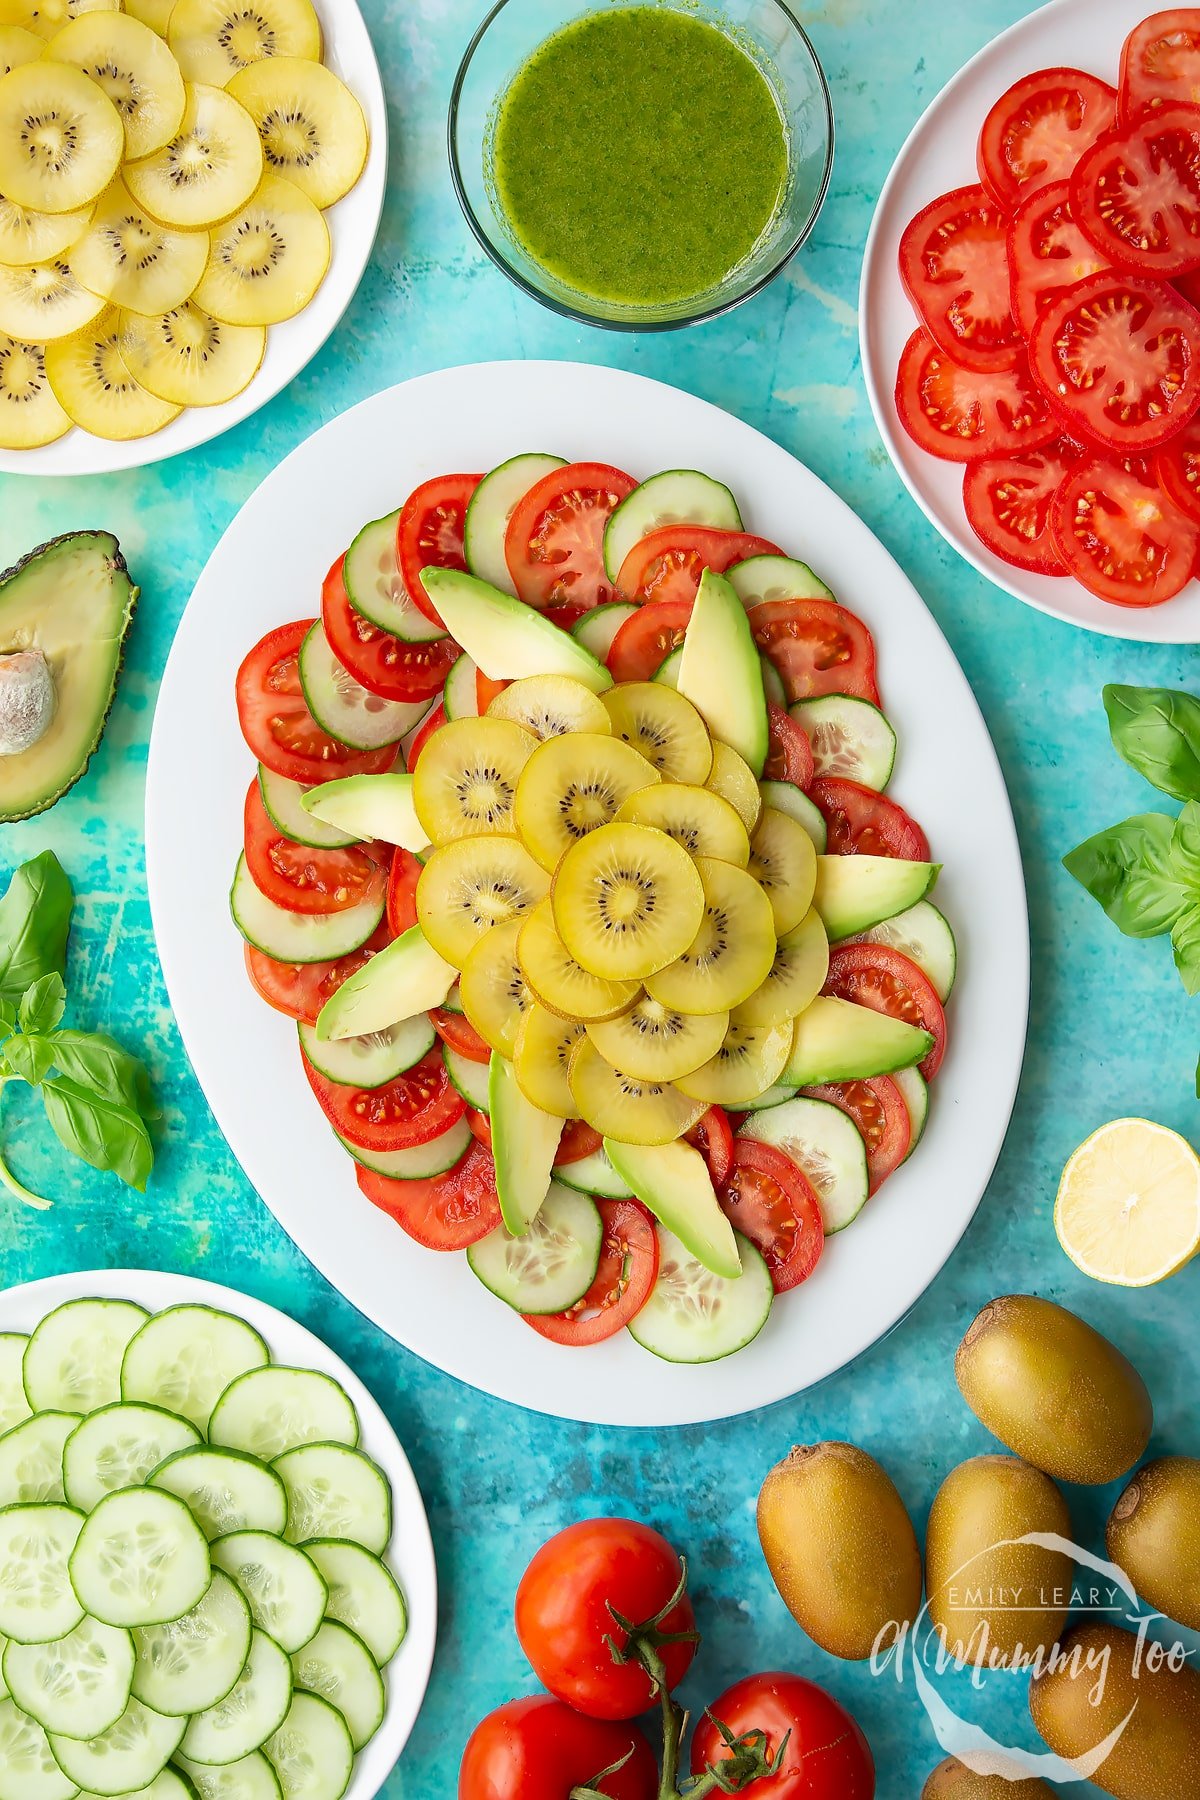 Sliced tomatoes, cucumber, avocado and golden kiwi on a white oval plate. Ingredients to make a kiwi feta salad surround the platter.